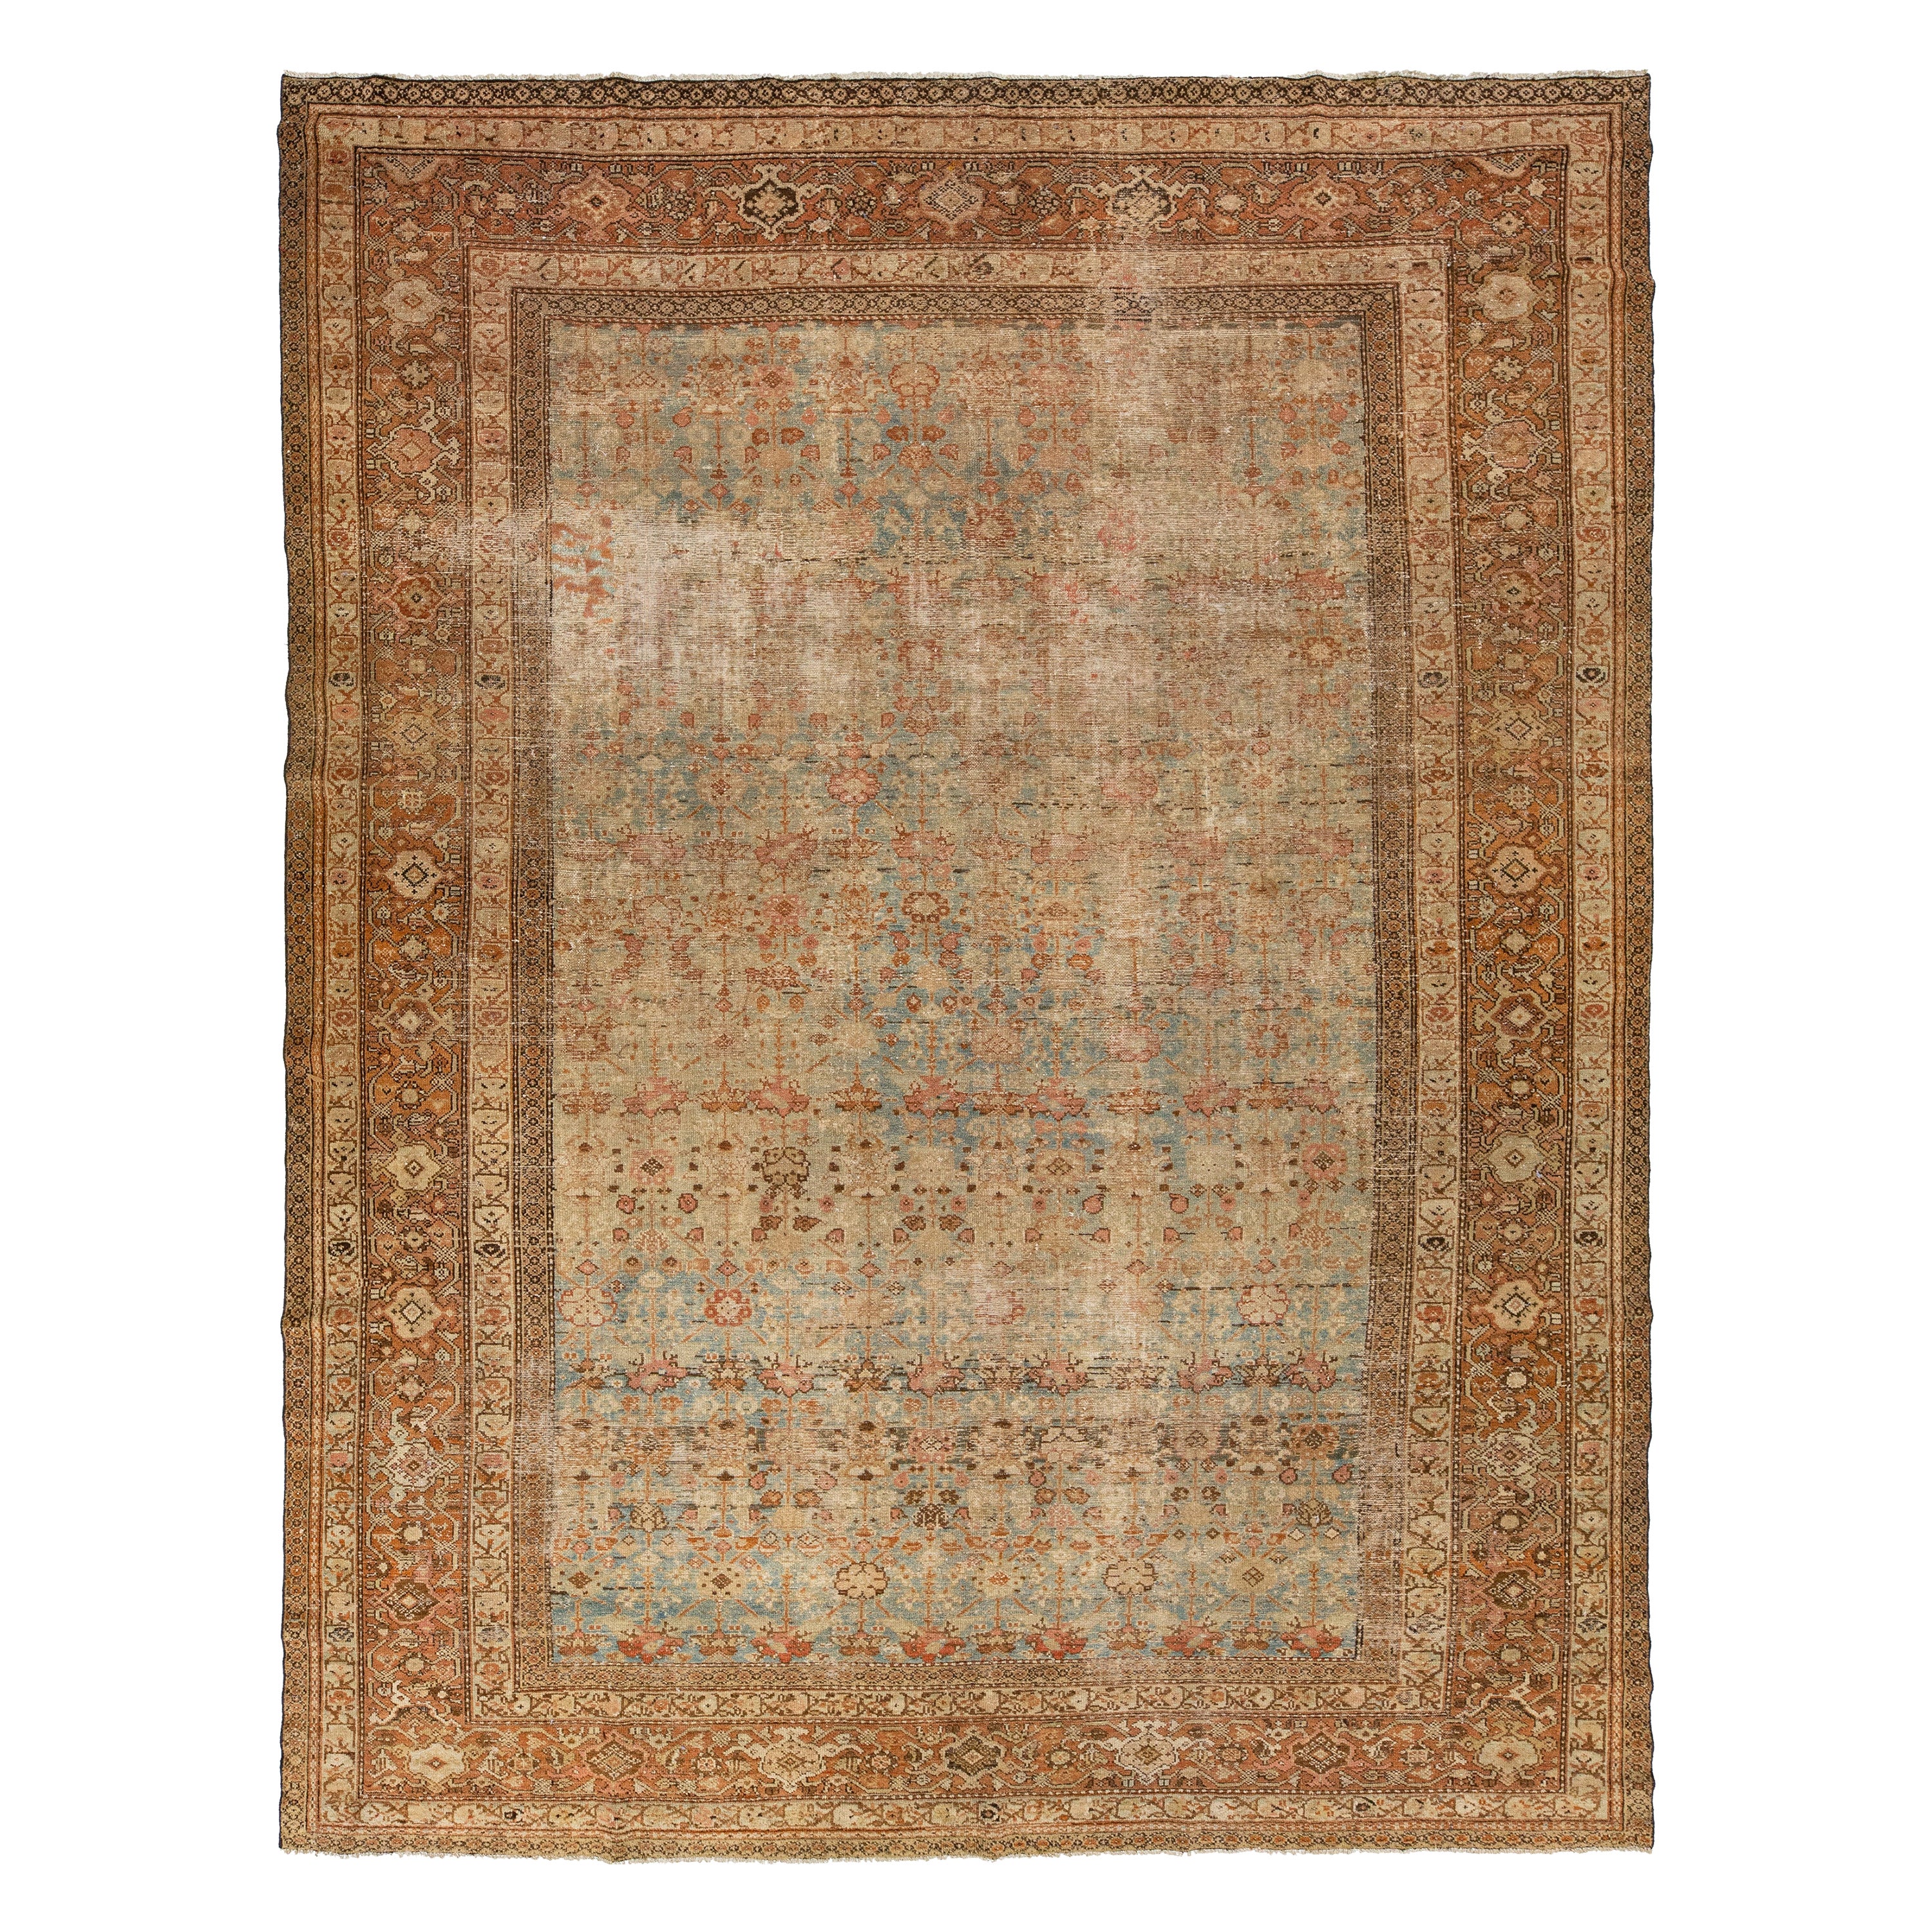 Handmade Antique Persian Malayer Wool Rug With Floral Motif From the 1920s For Sale